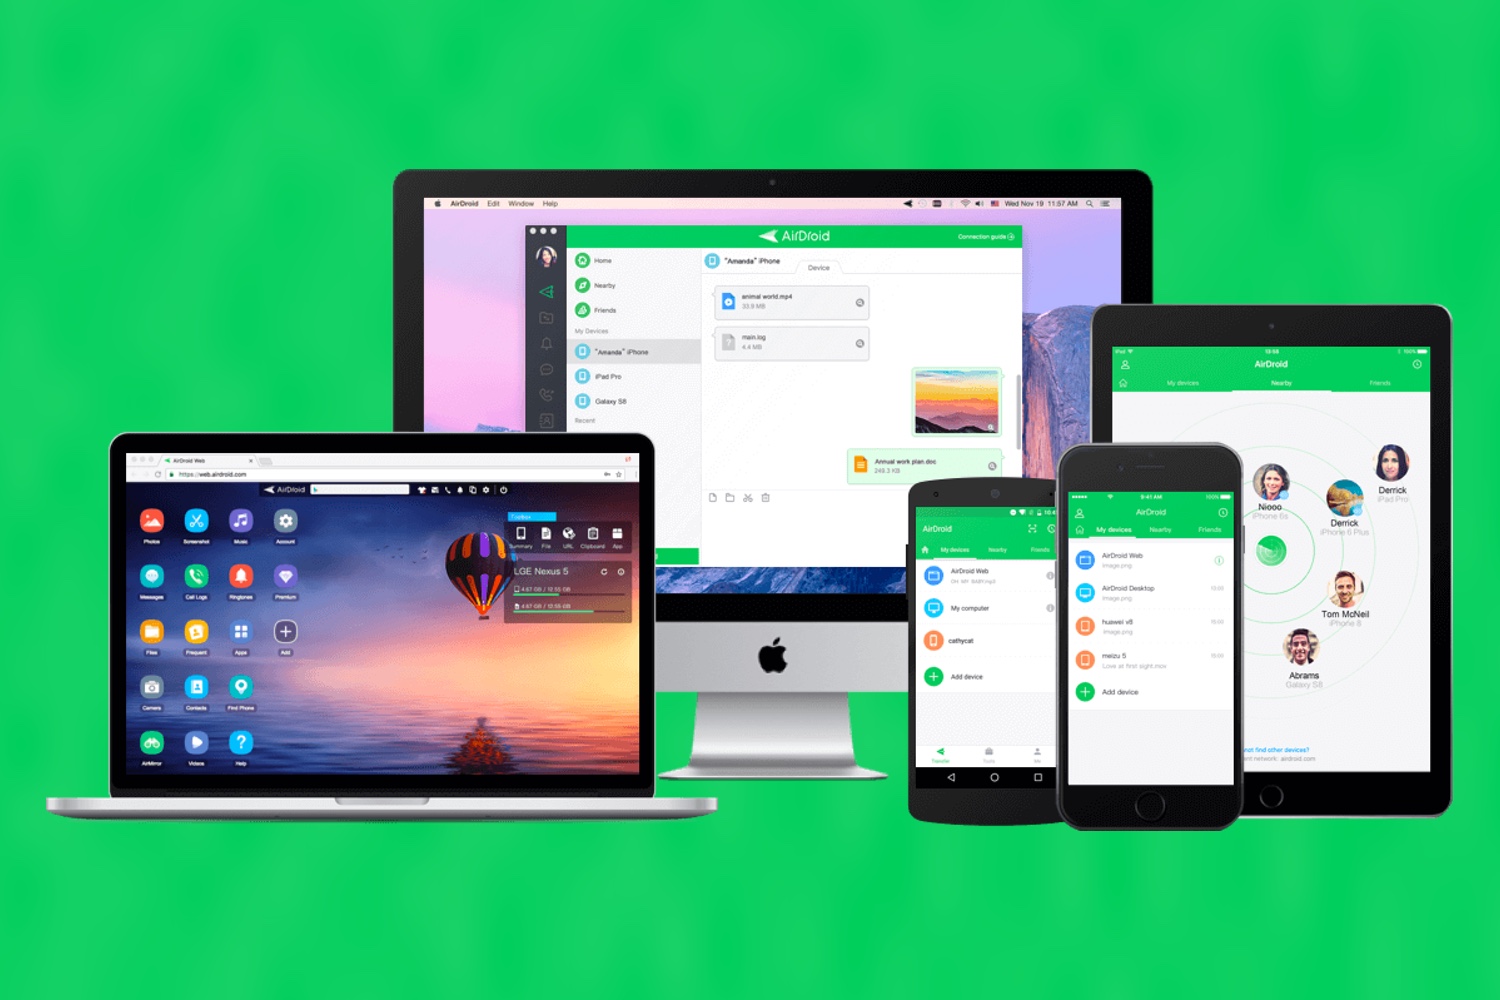 download the new version for android AirDroid 3.7.2.1